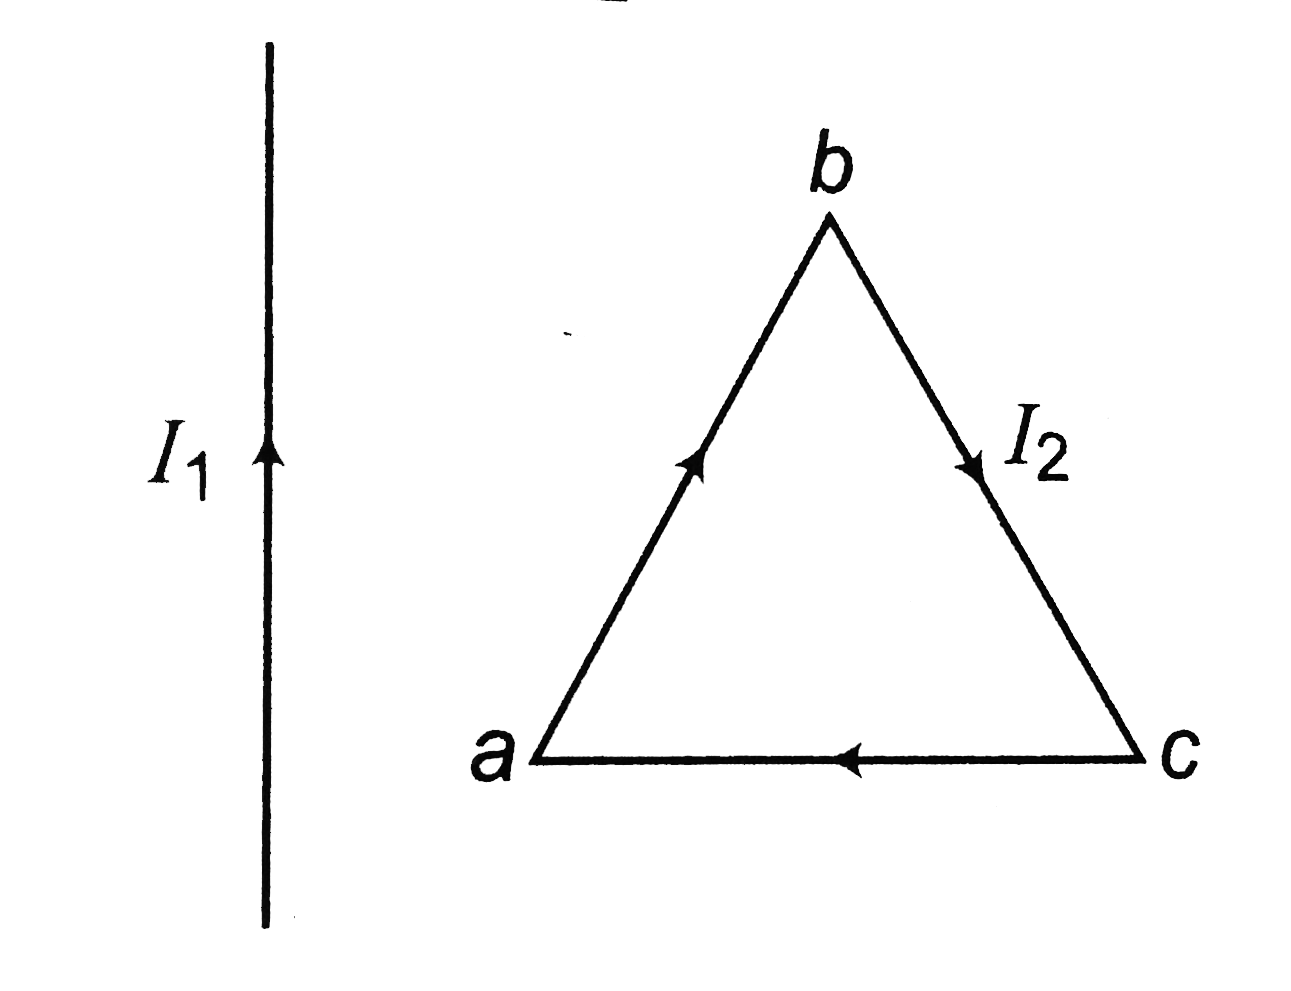 An infinitely long straight wire is carrying a current I1. Adjacent to it there is another equilateral triangular wire having current I2. Choose the wrong options